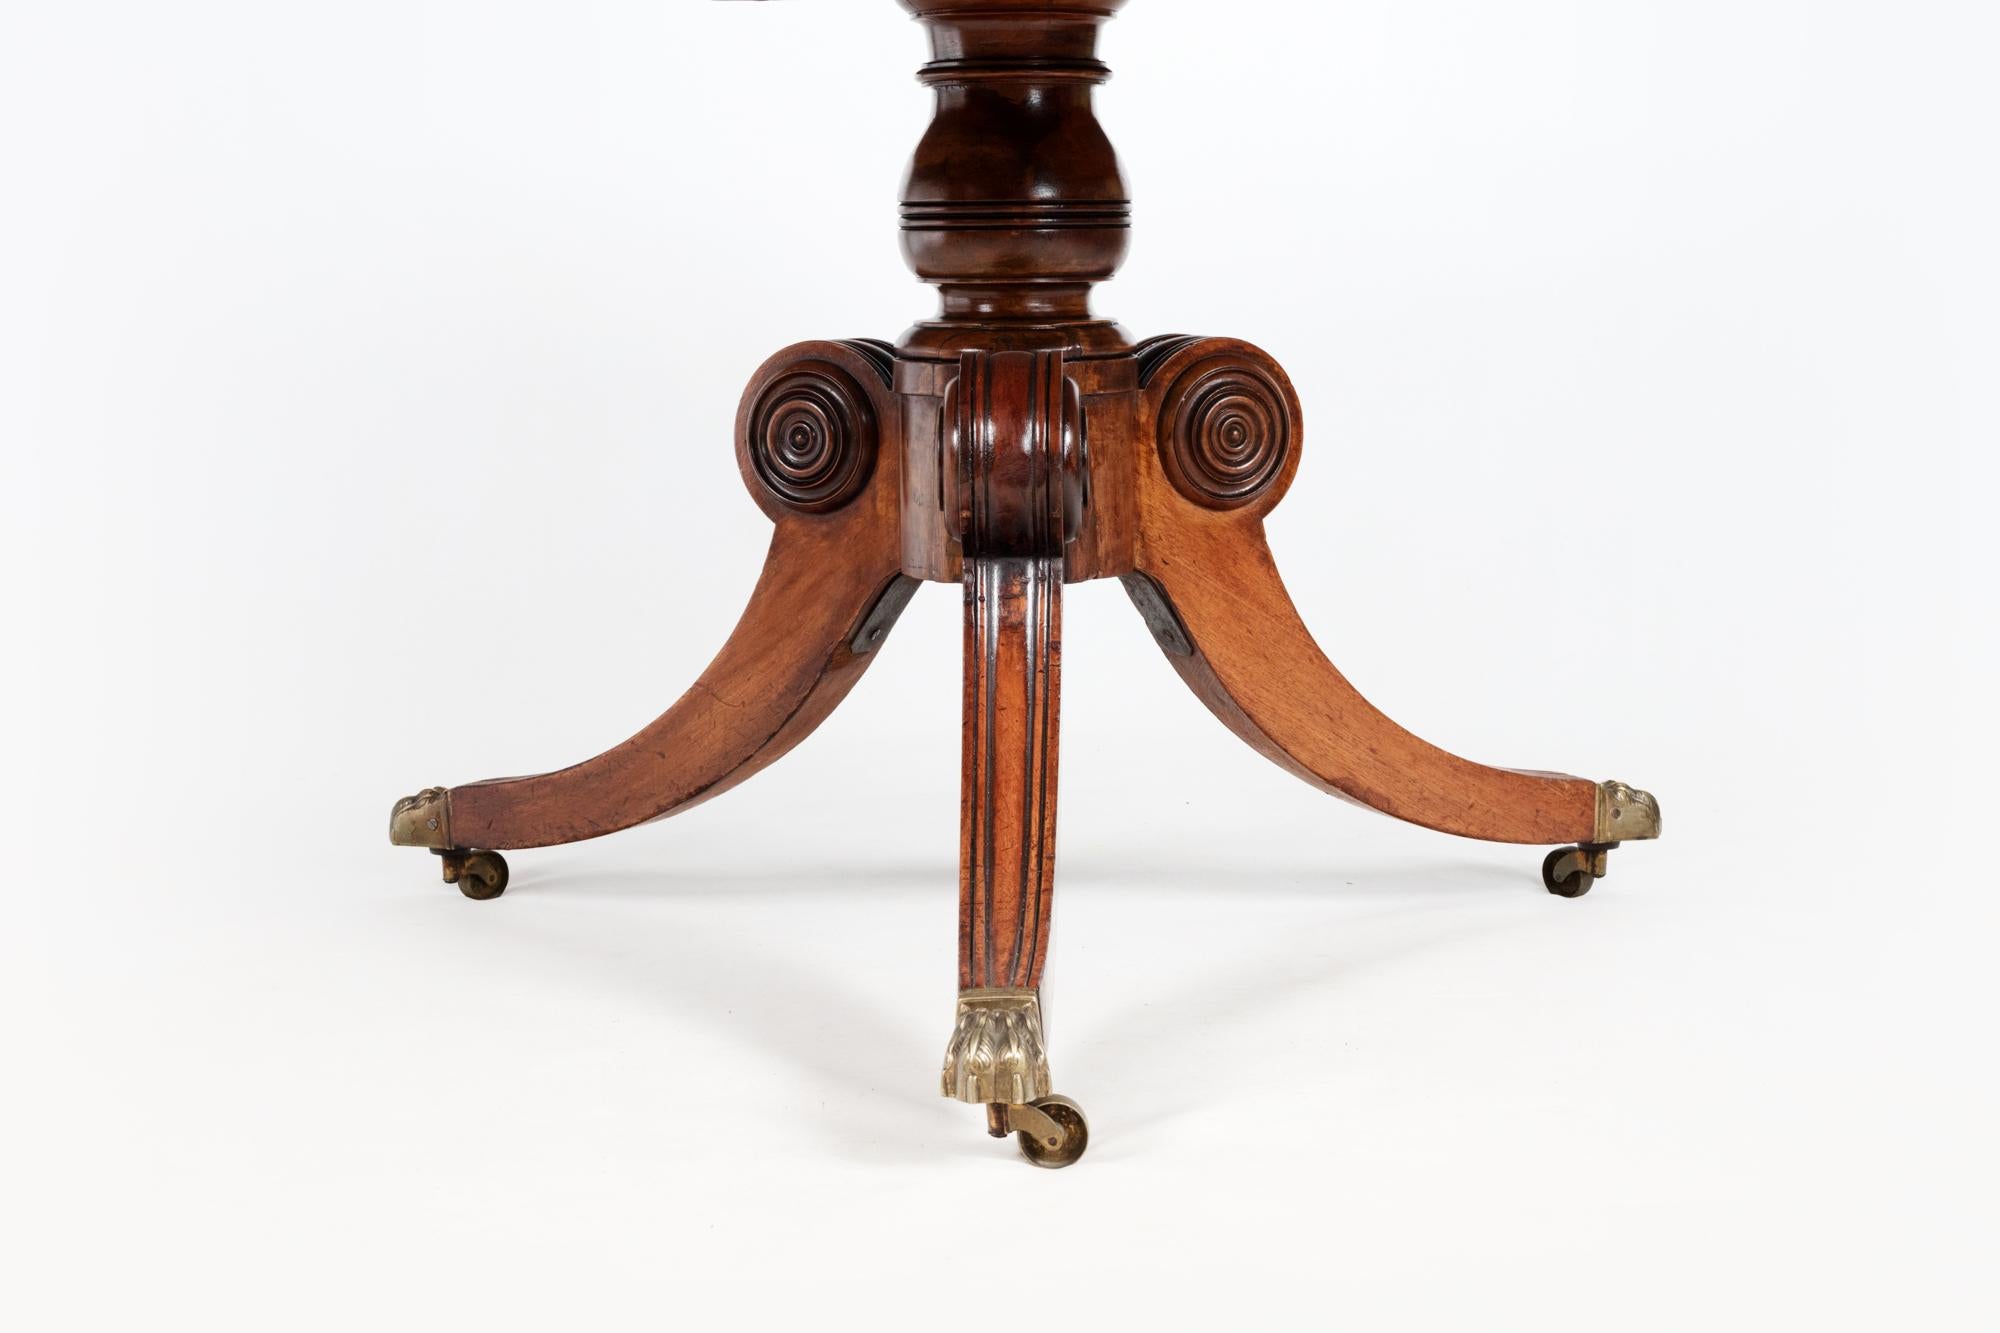 19th century mahogany tip-up dining table crossbanded with rosewood on splay pod legs terminating with brass lion feet castors.